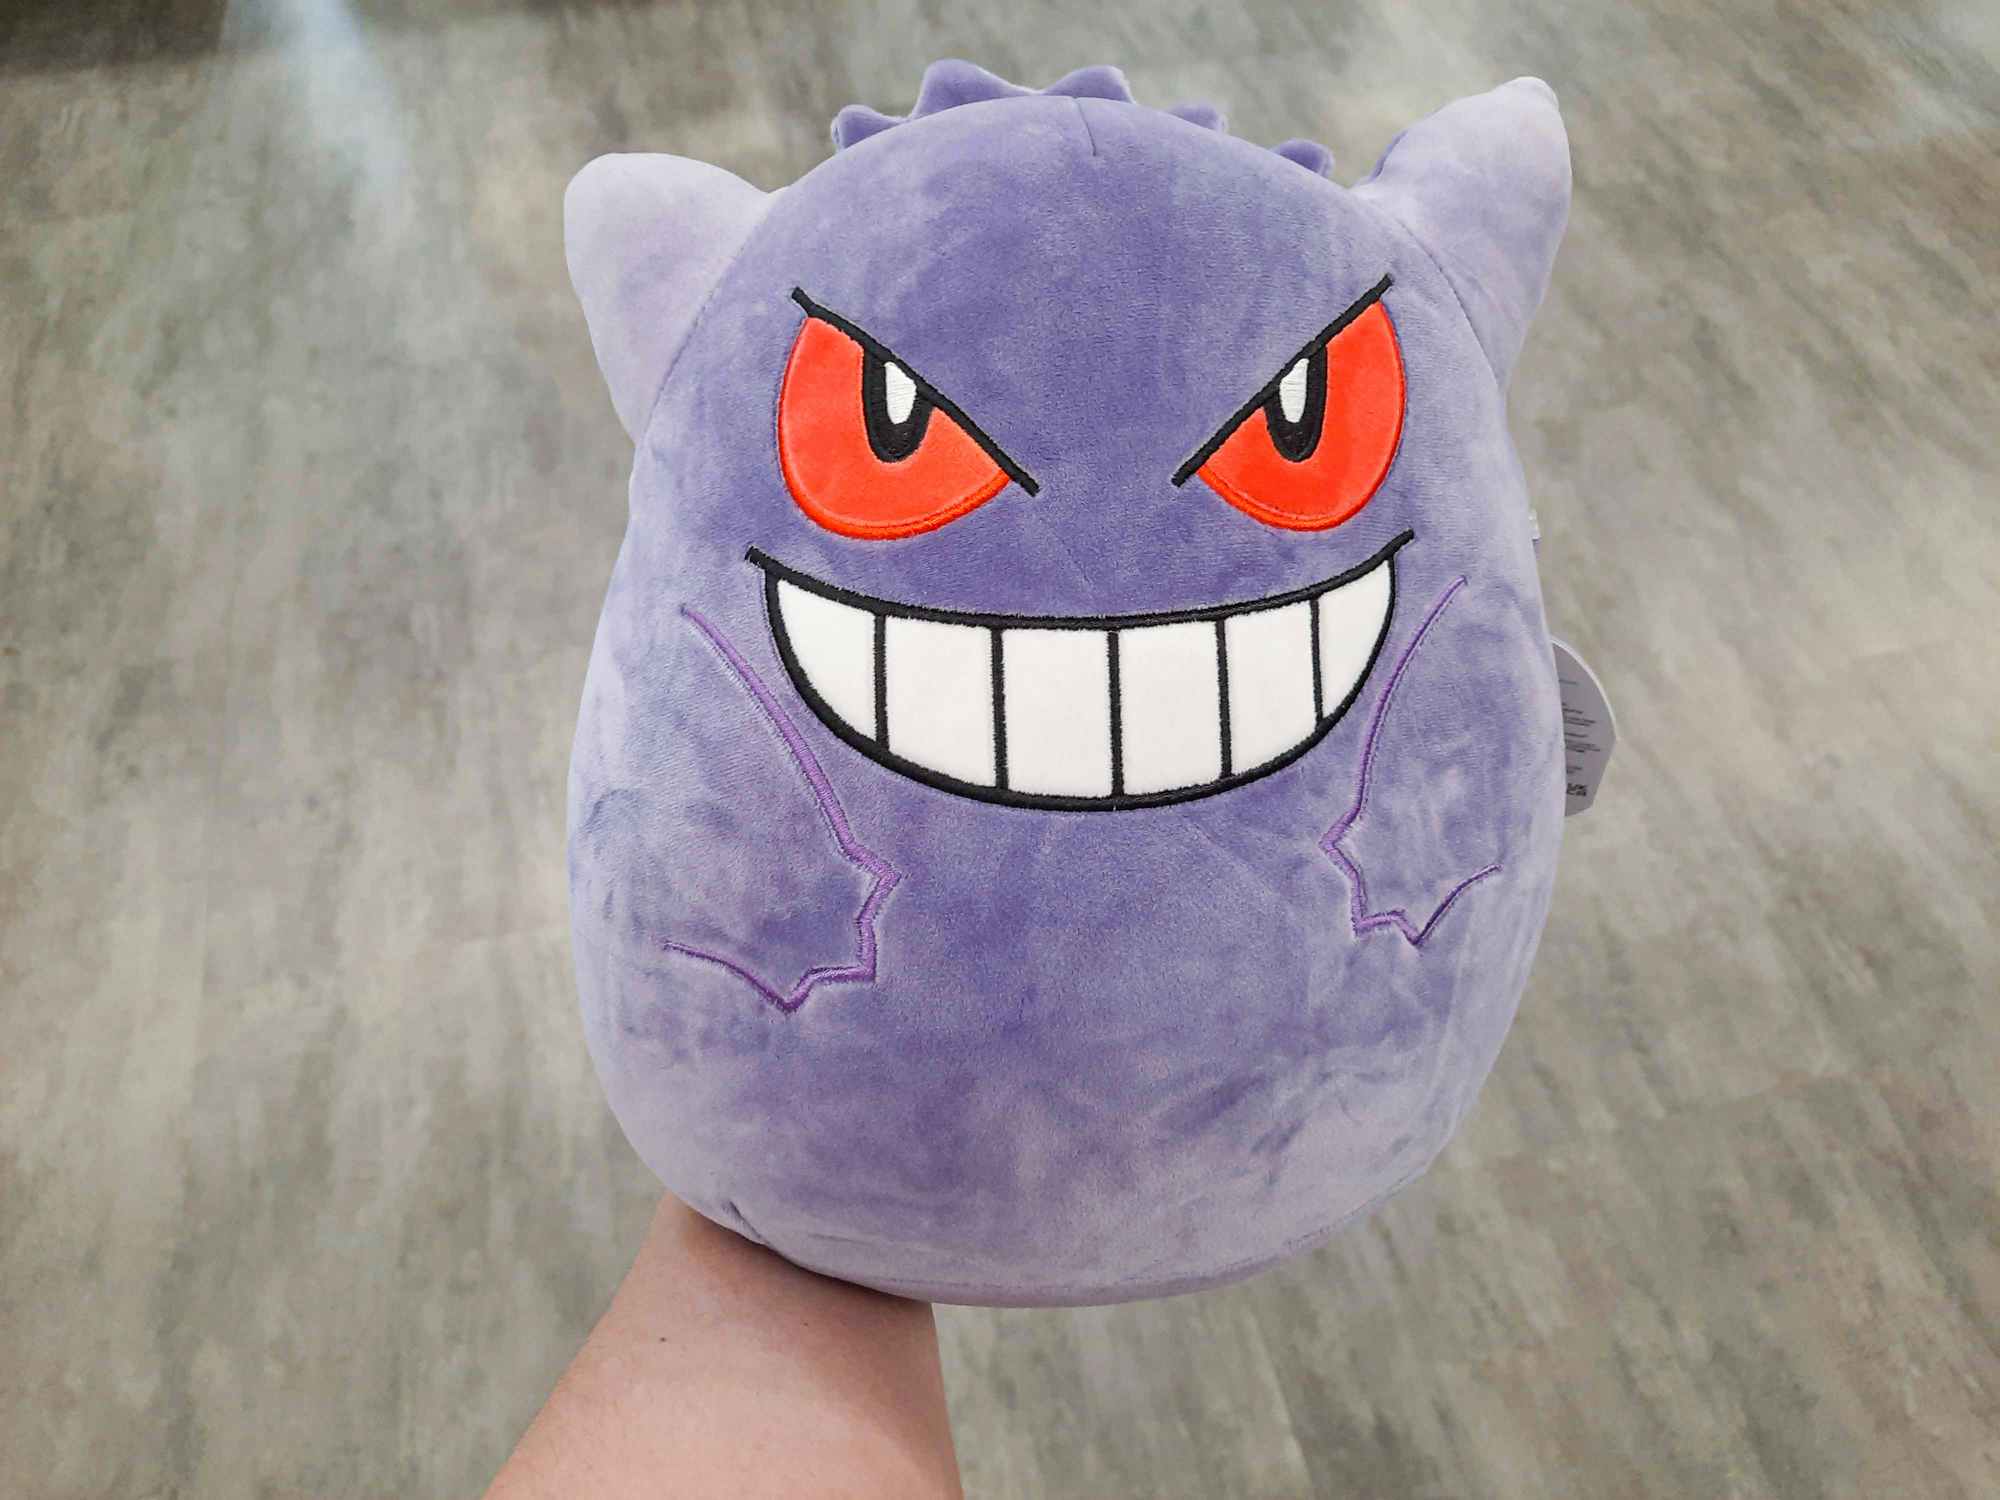 Pokemon Squishmallows Are Only $15 At Walmart Right Now - GameSpot